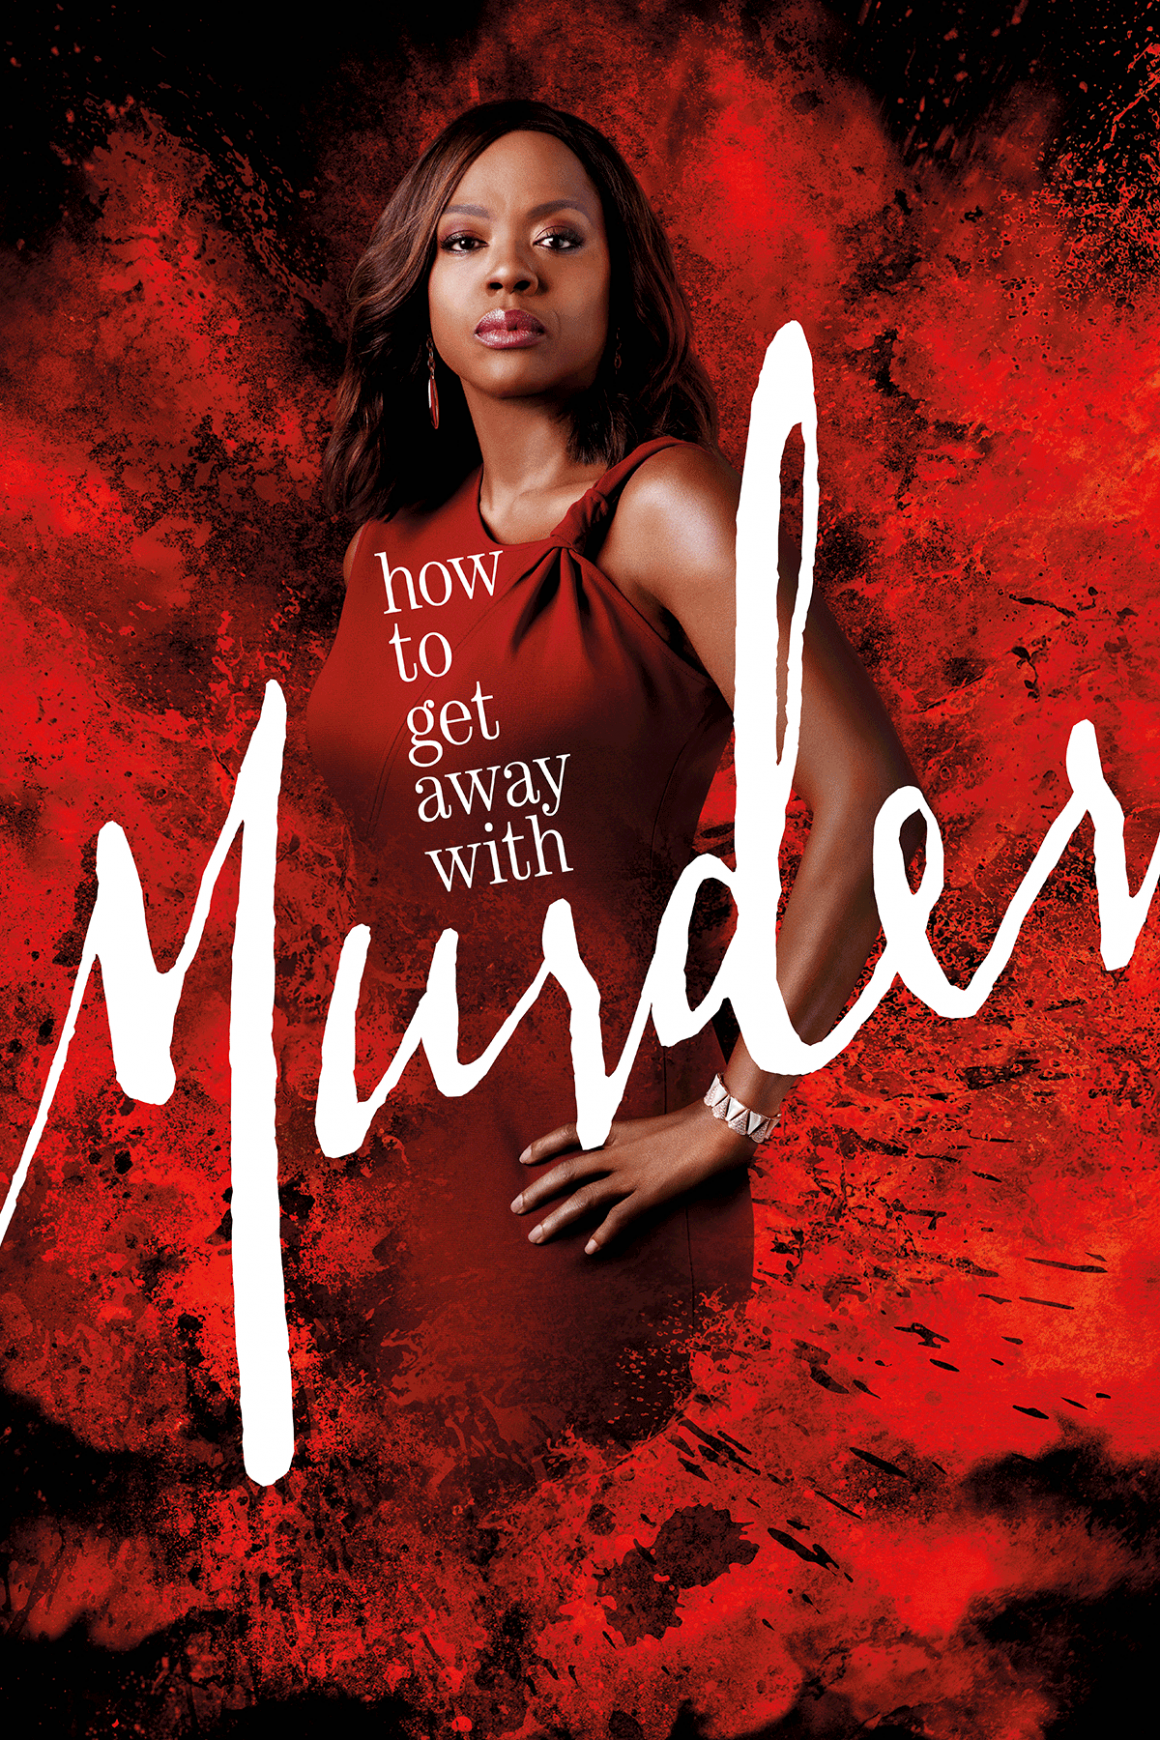 how to get away with murder - Shondaland